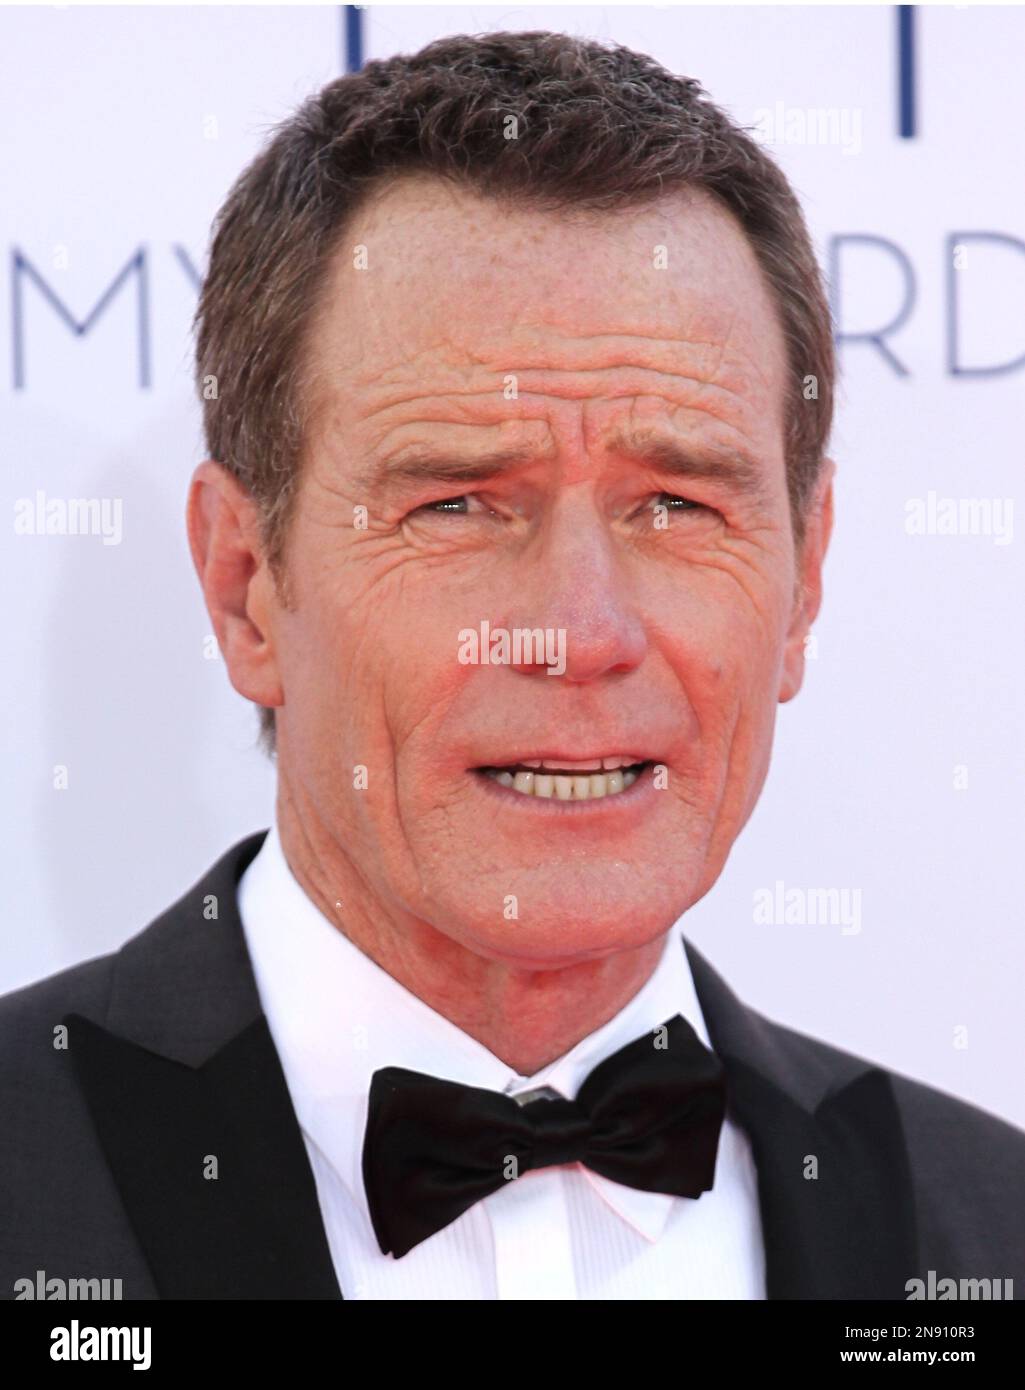 Actor Bryan Cranston Arrives At The 64th Primetime Emmy Awards At The Nokia Theatre On Sunday